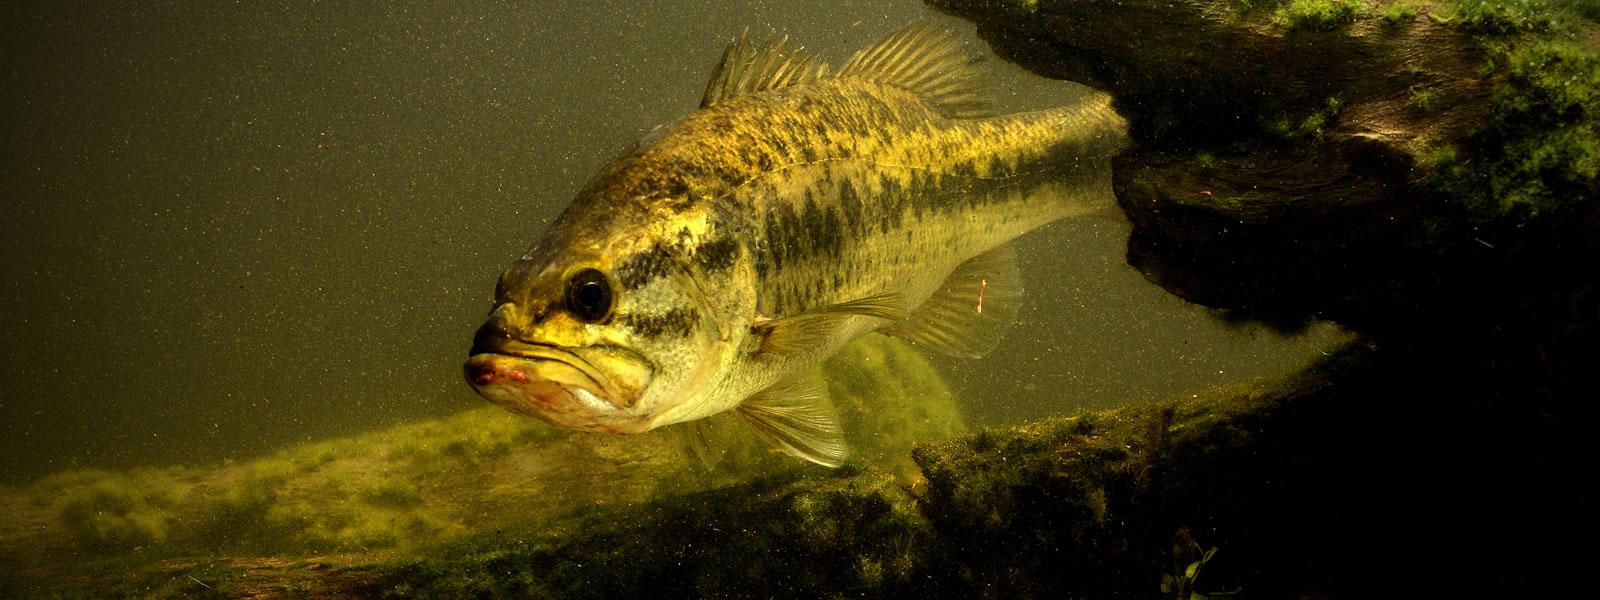 Largemouth Bass Micropterus salmoides in pond